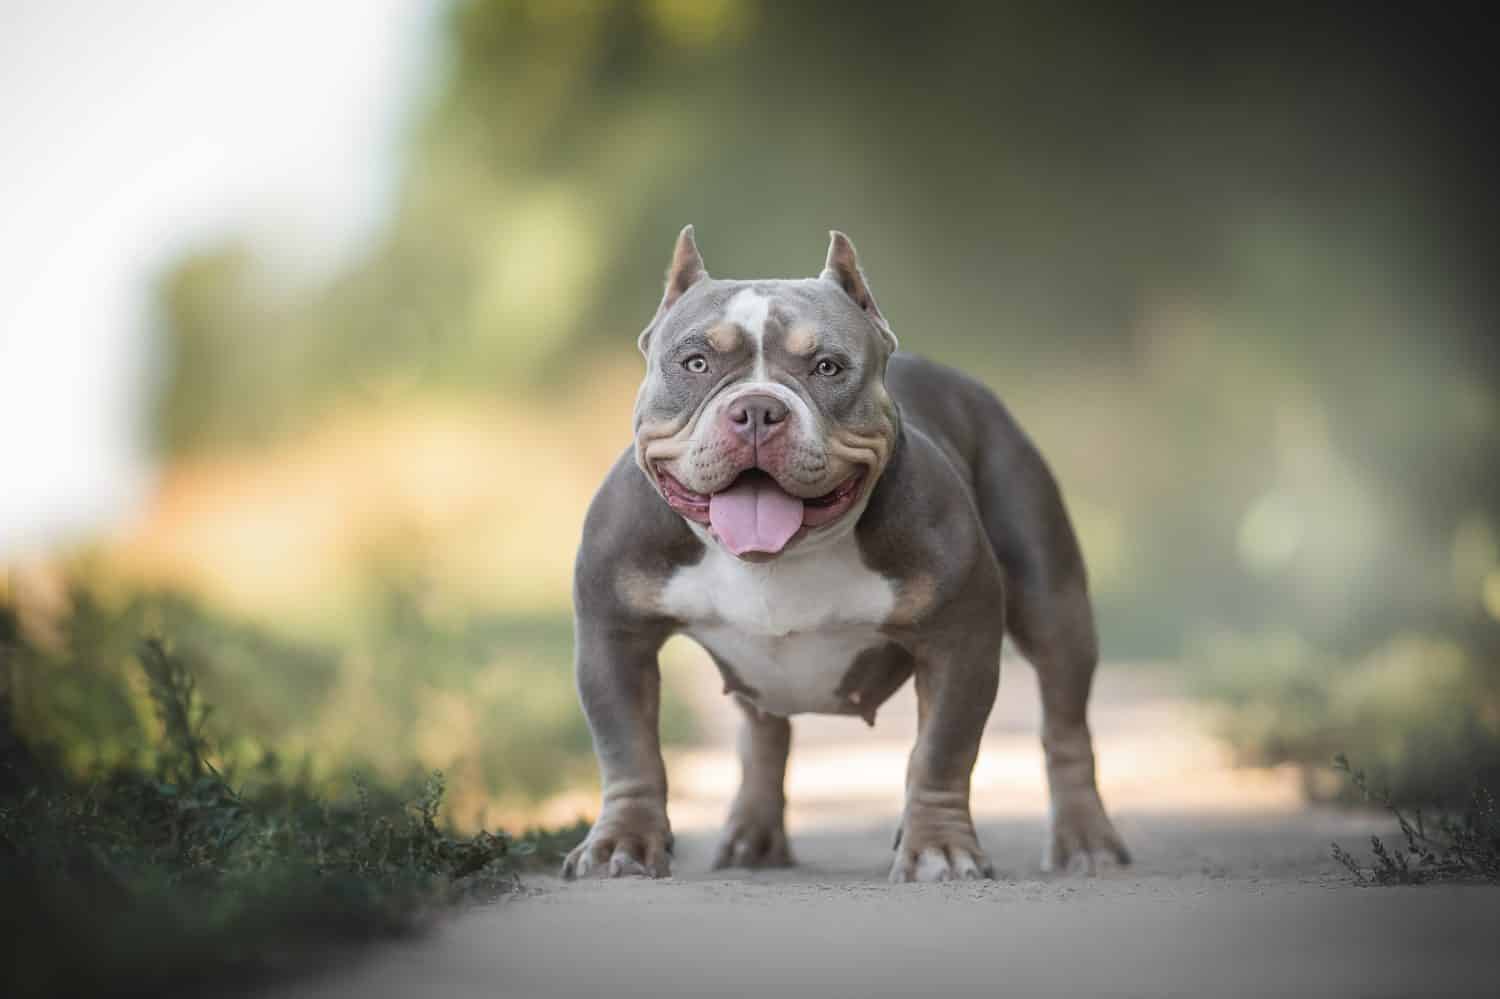 A young lilac American Bully standing on a sandy path among the green grass and looking directly into the camera against the backdrop of a bright summer landscape. The mouth is open